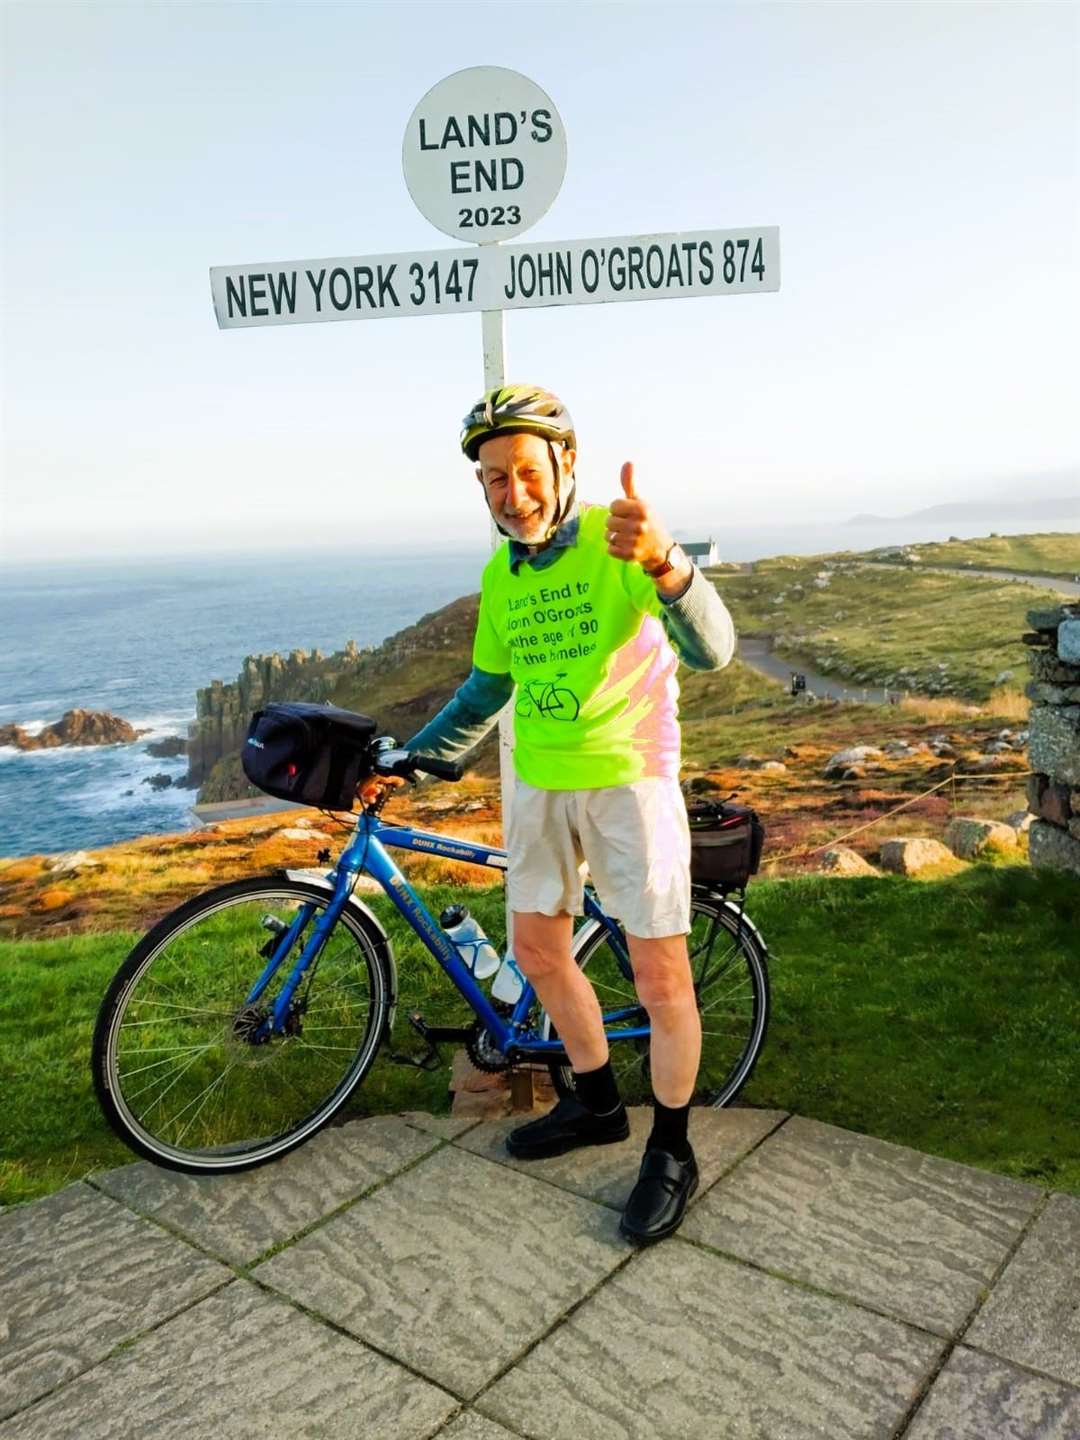 Peter at the start of his journey at Land's End on August 23.